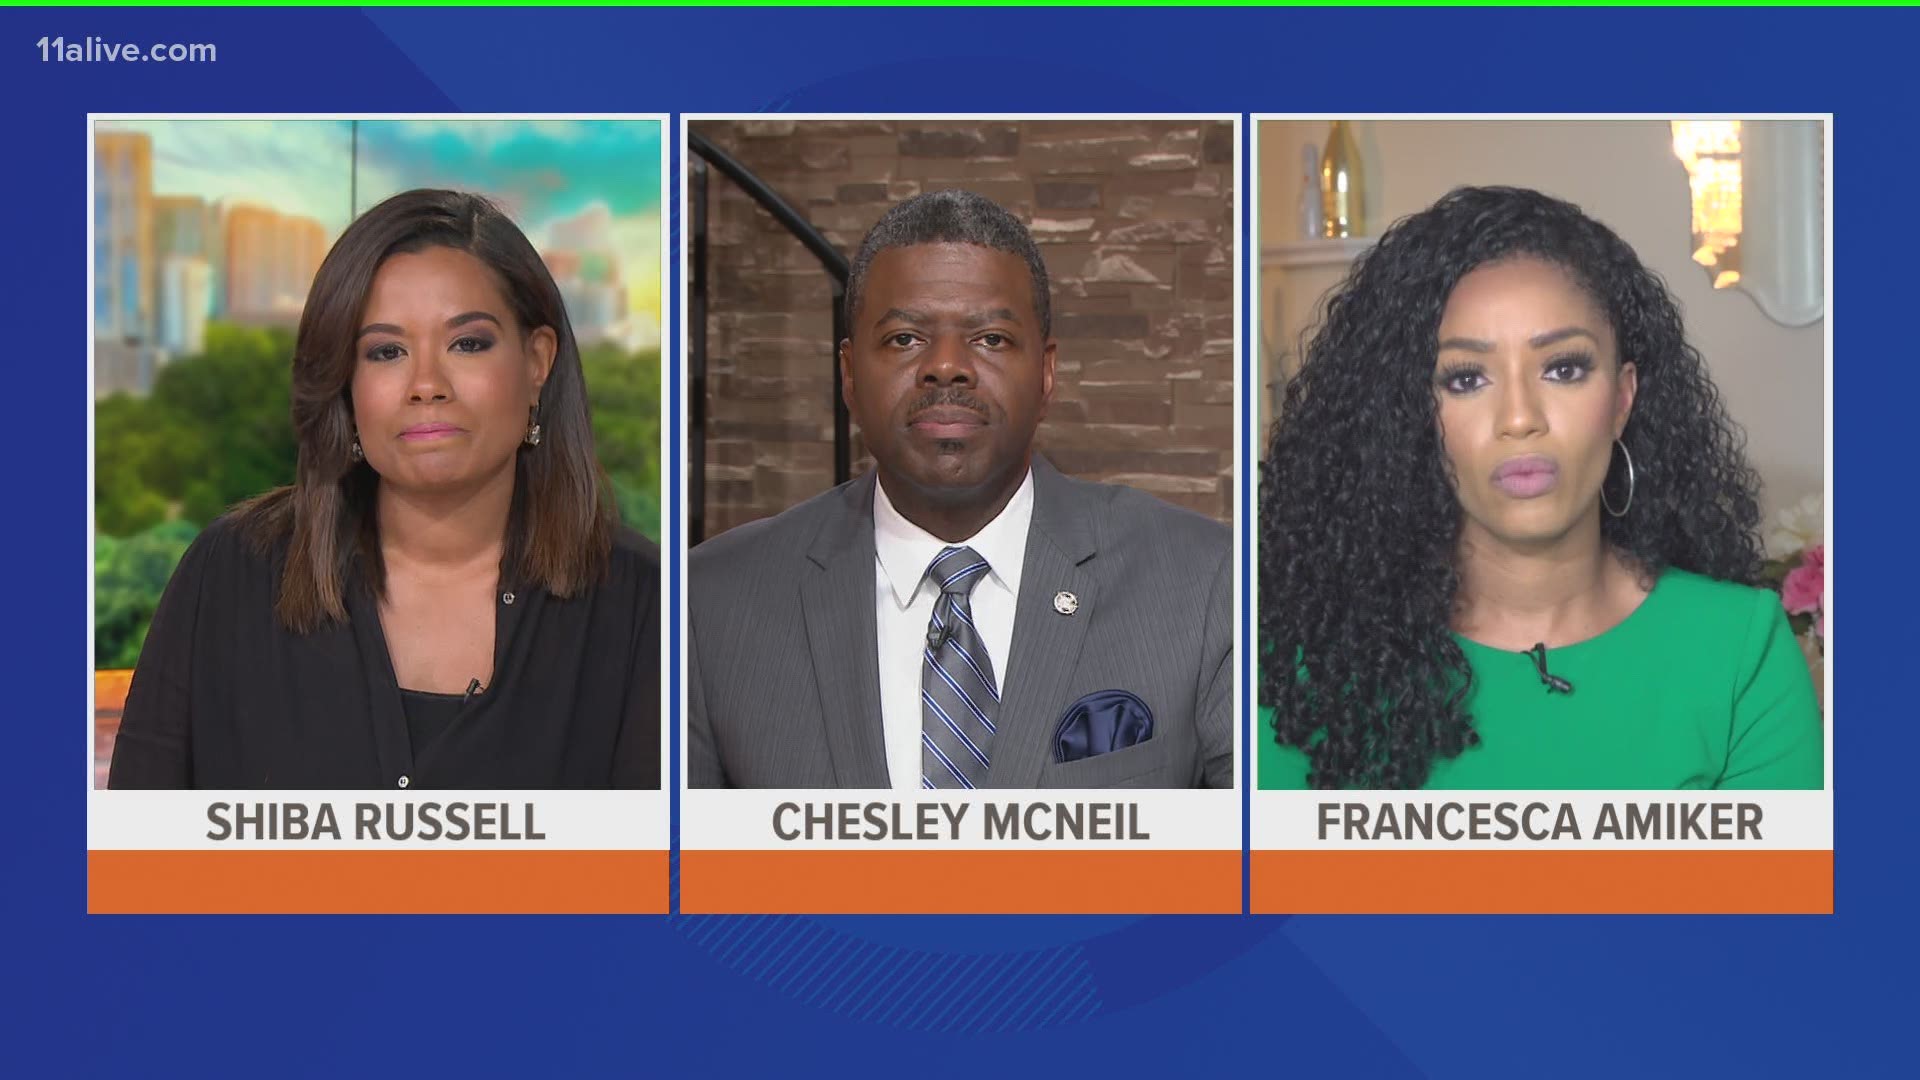 11Alive's Shiba Russell, Chesley McNeil and Francesca Amiker reflect on weekend Atlanta protests.